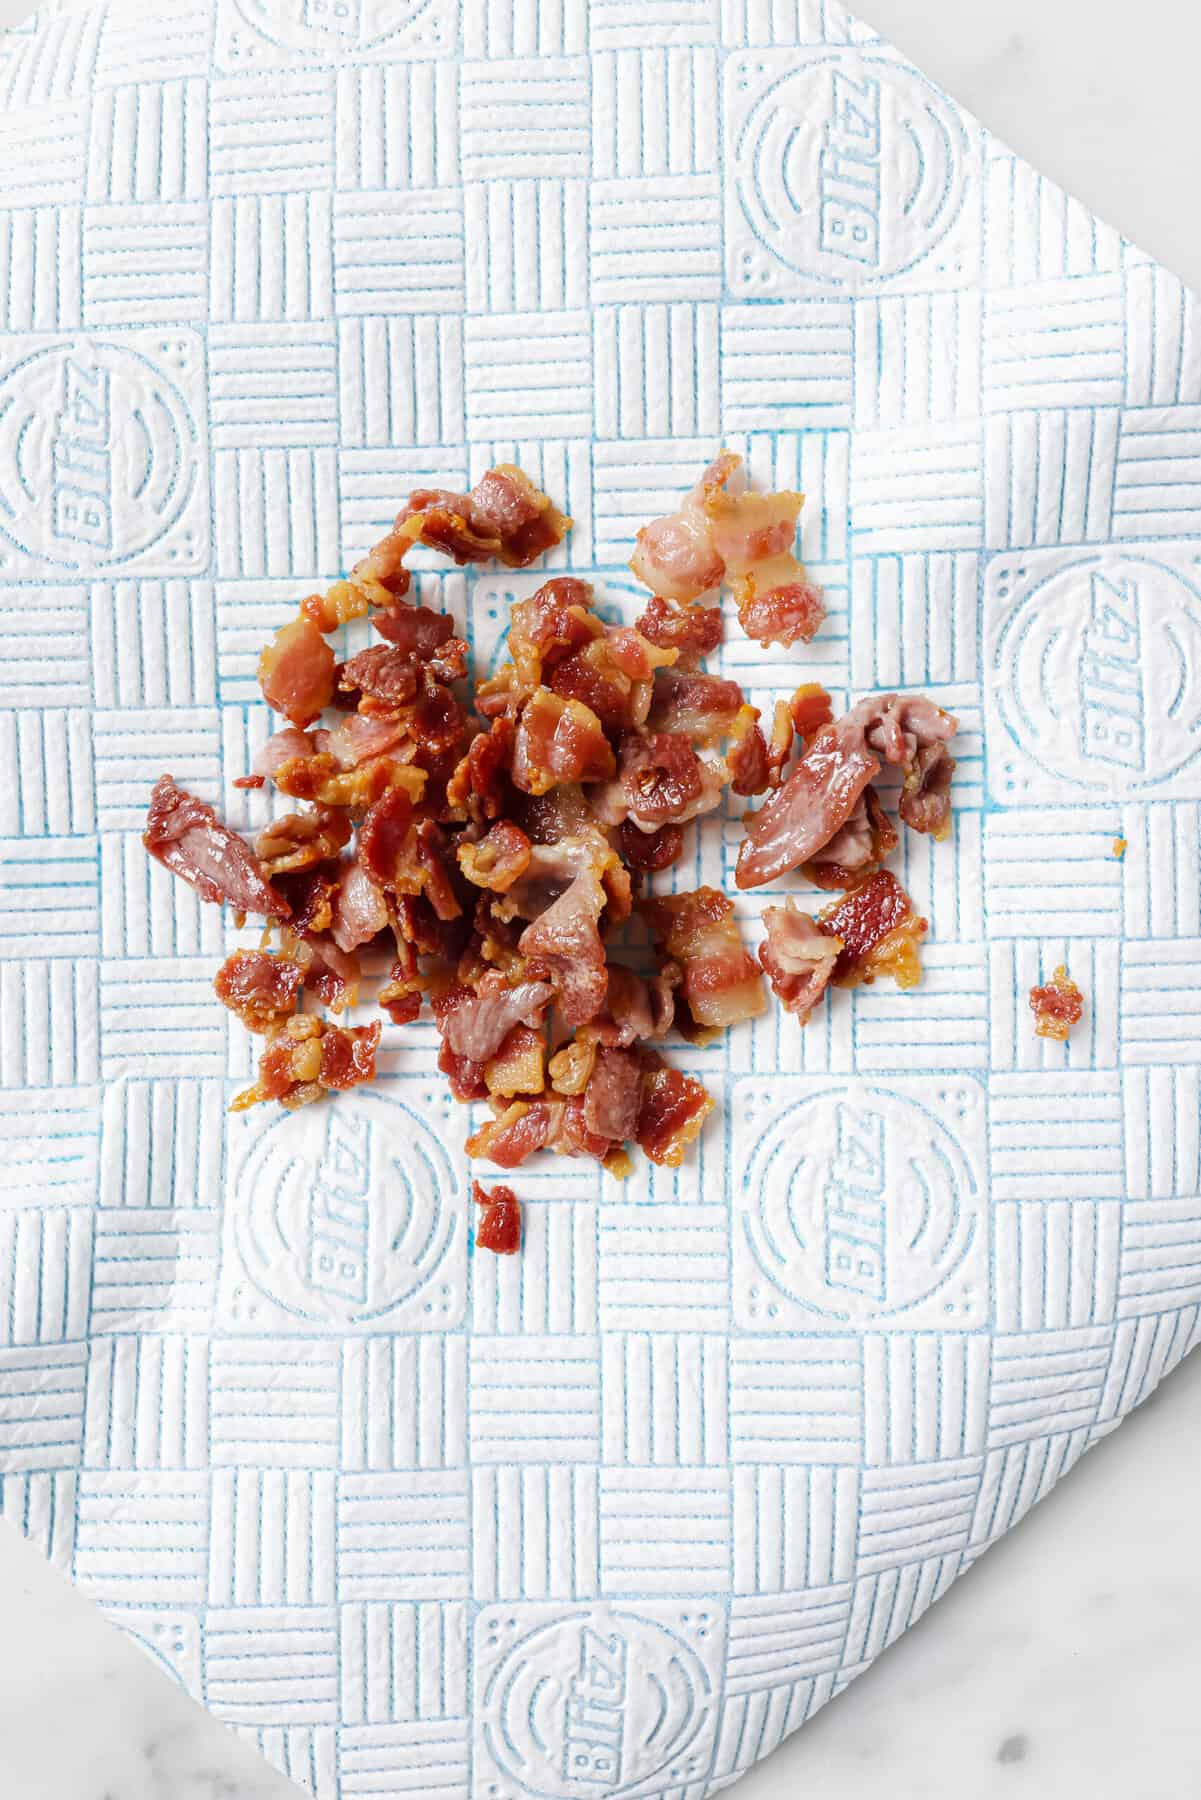 Placing the bacon on a paper-towel lined dish.